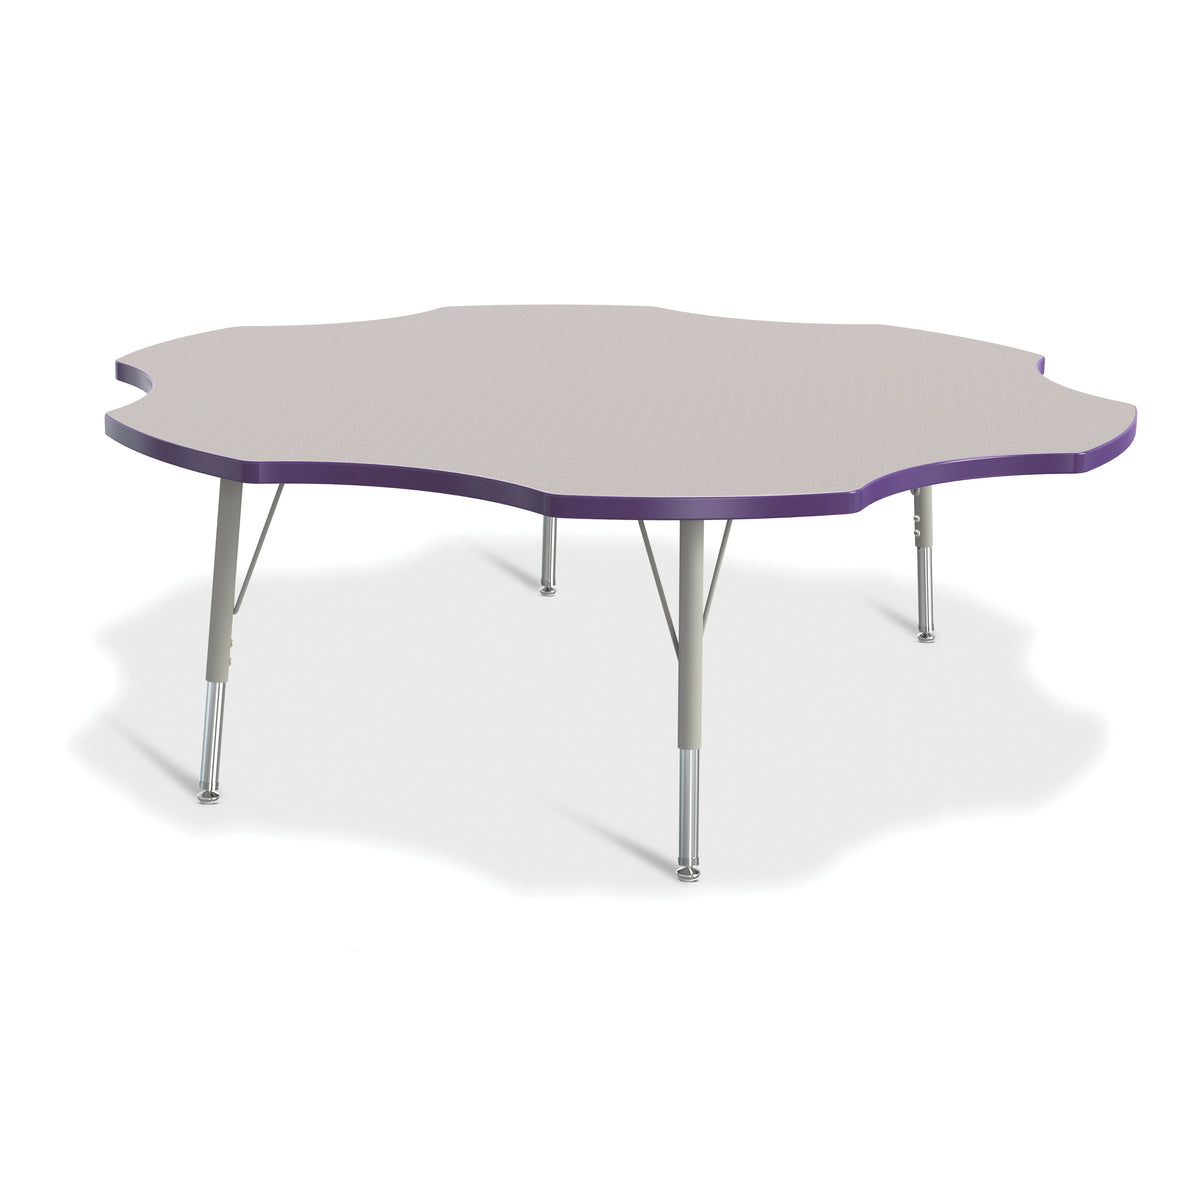 6458JCE004, Berries Six Leaf Activity Table - 60", E-height - Freckled Gray/Purple/Gray